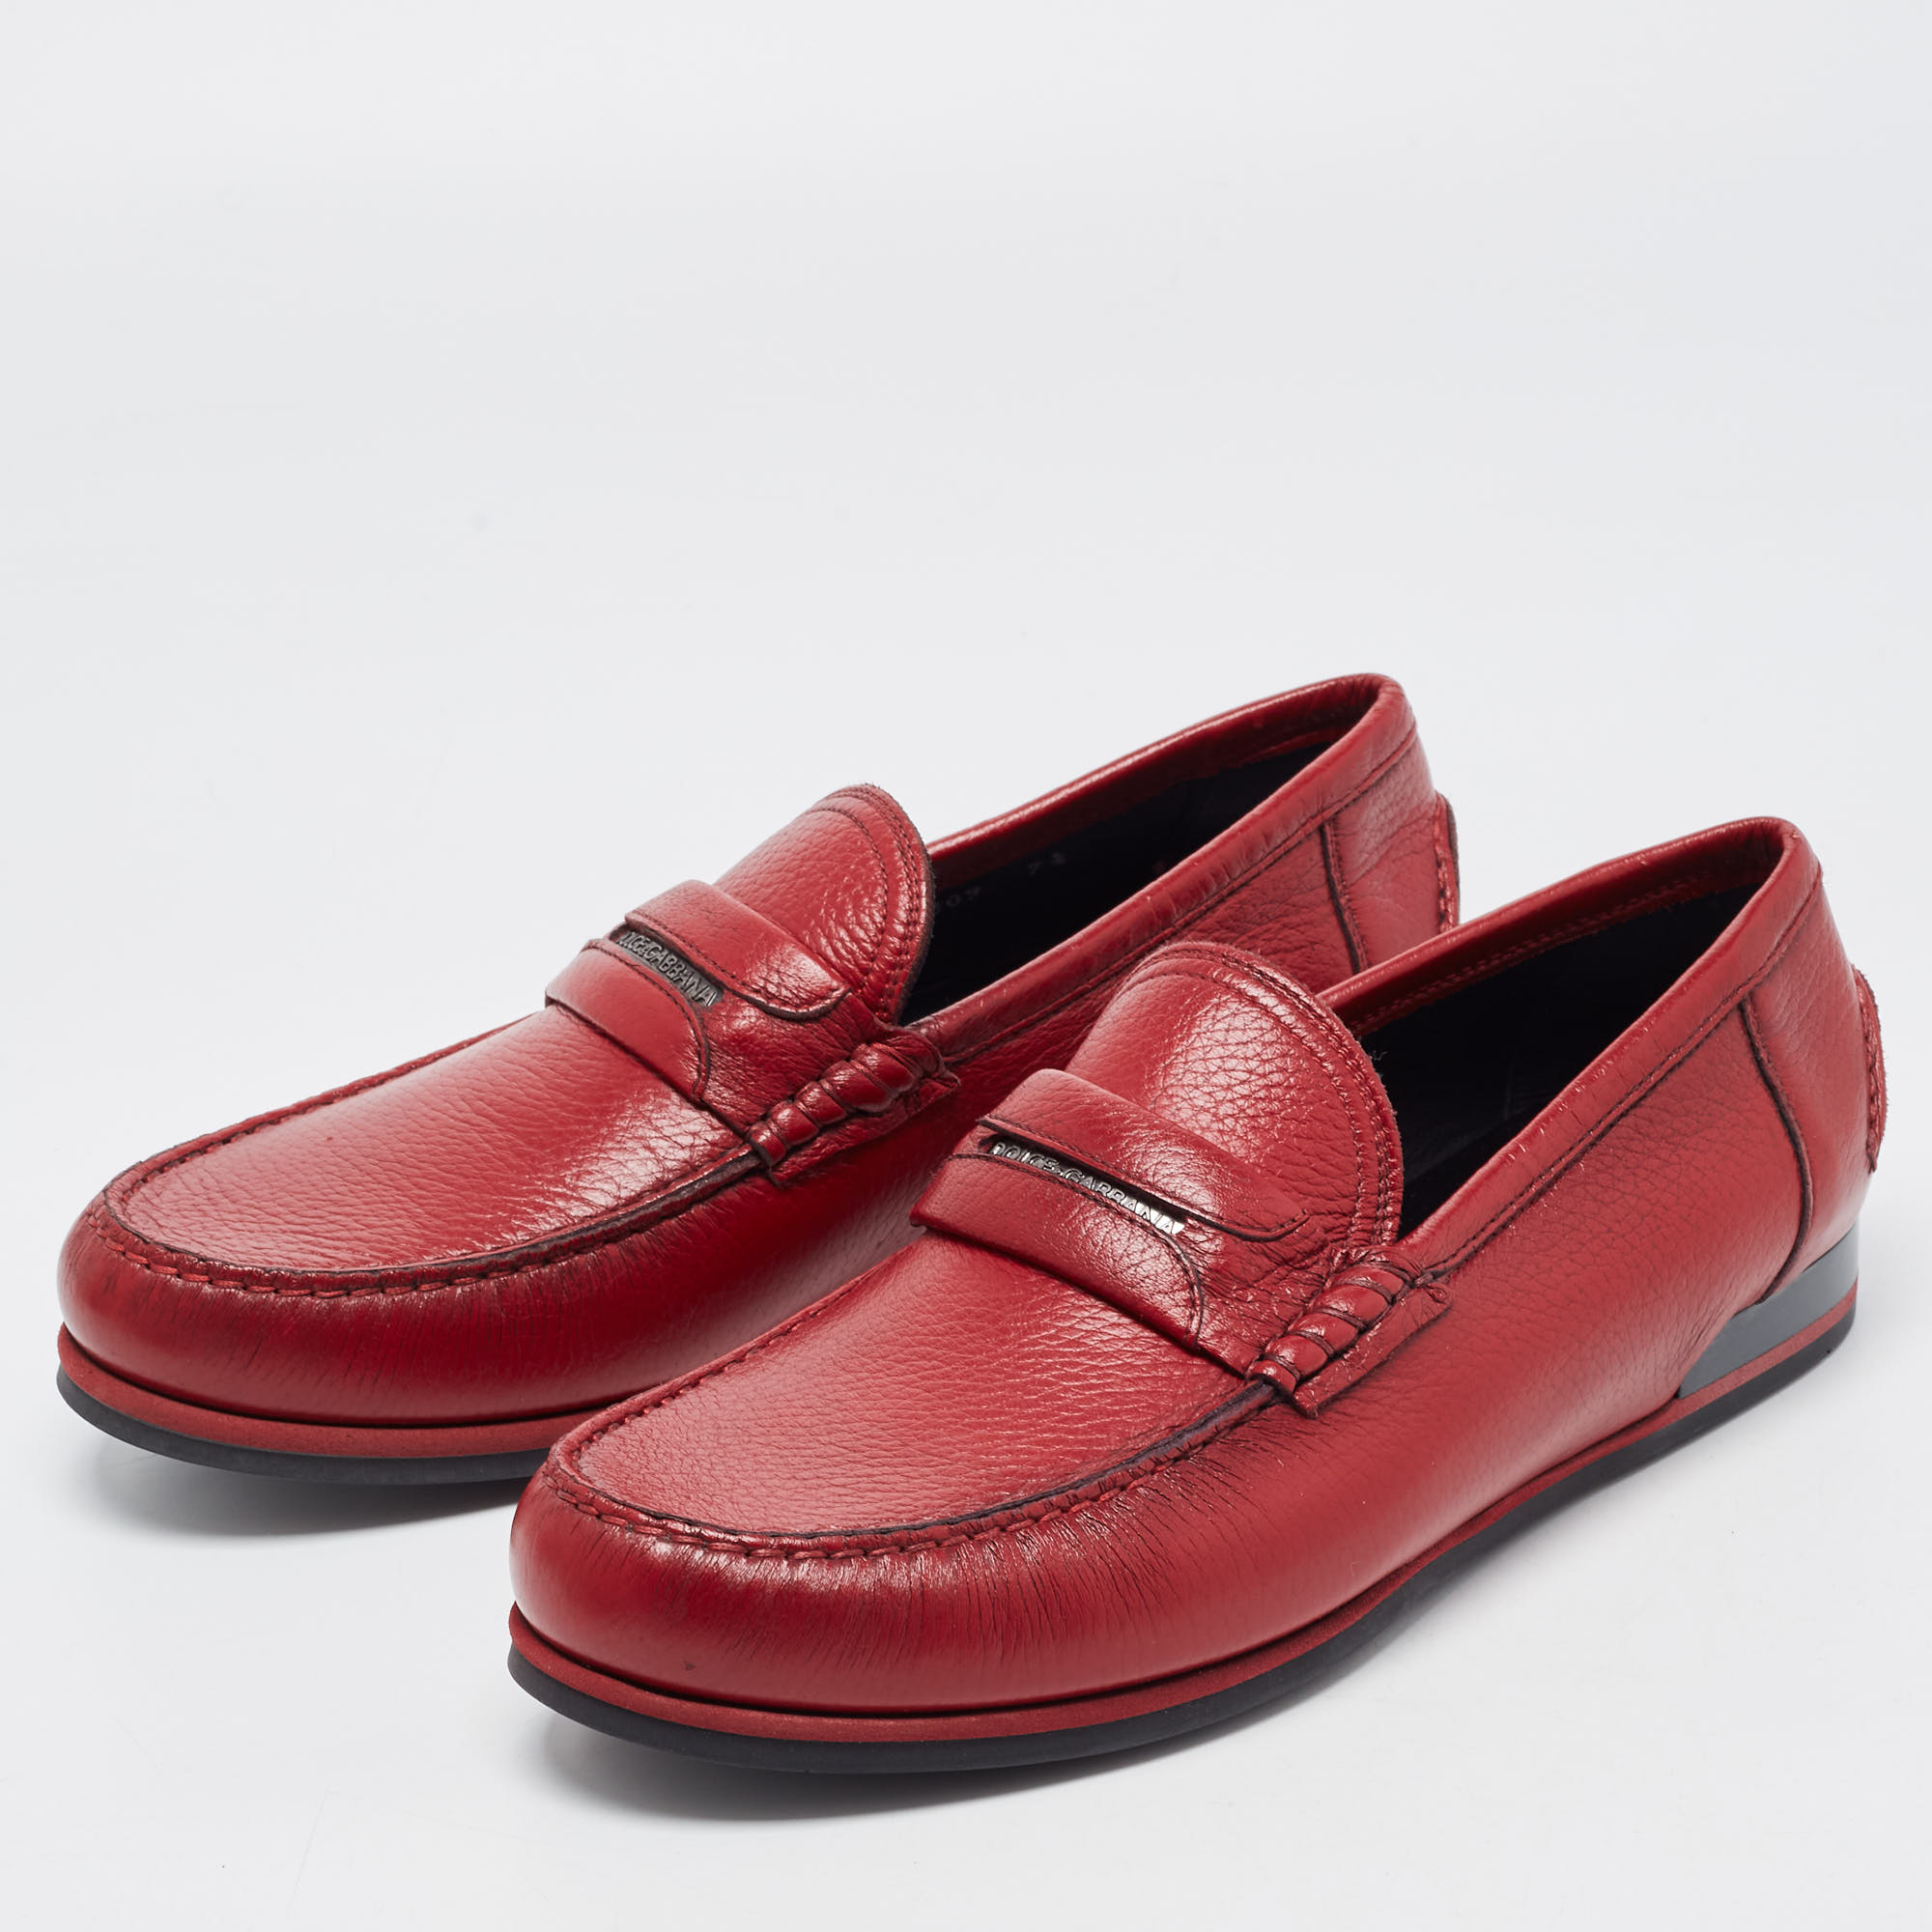 

Dolce & Gabbana Red Leather Penny Loafers Size